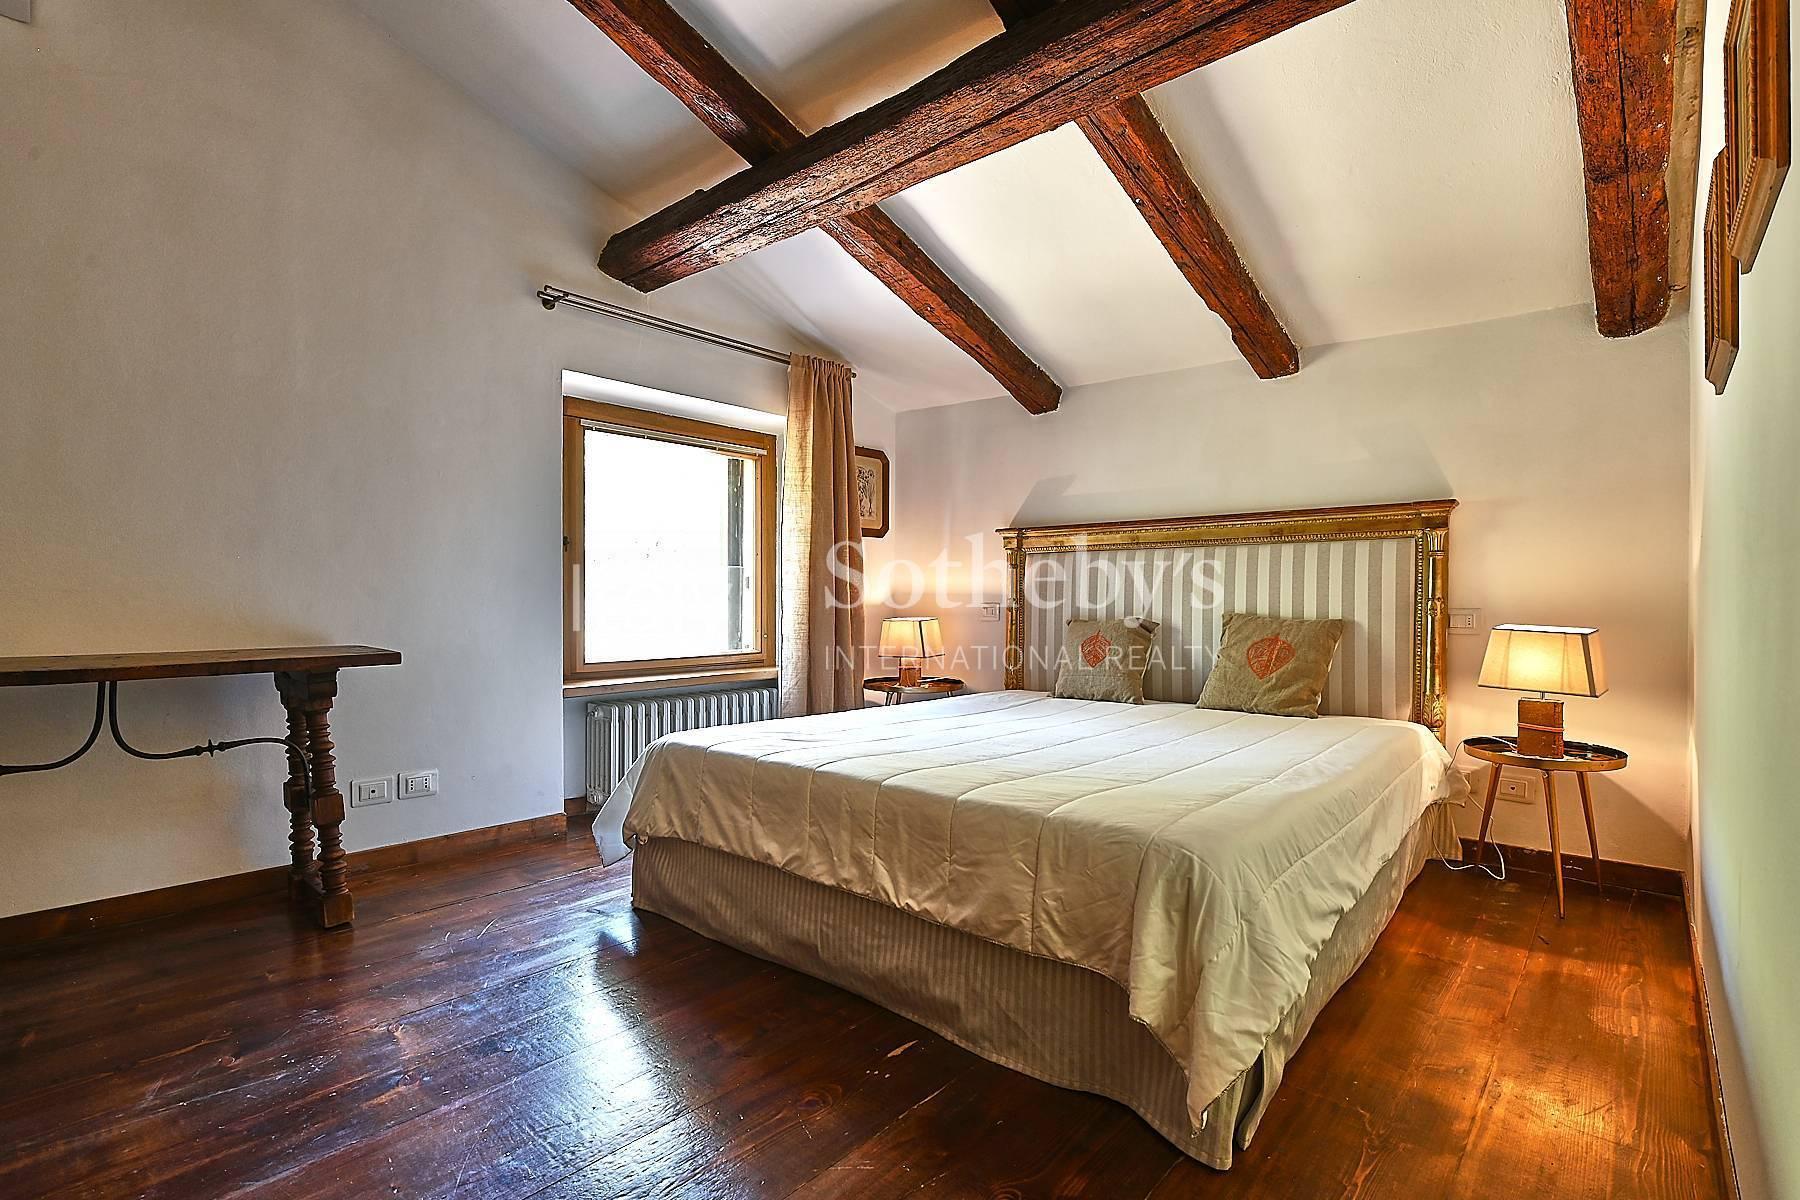 15th century frescoed villa with magnificent panoramic view over the city - 14